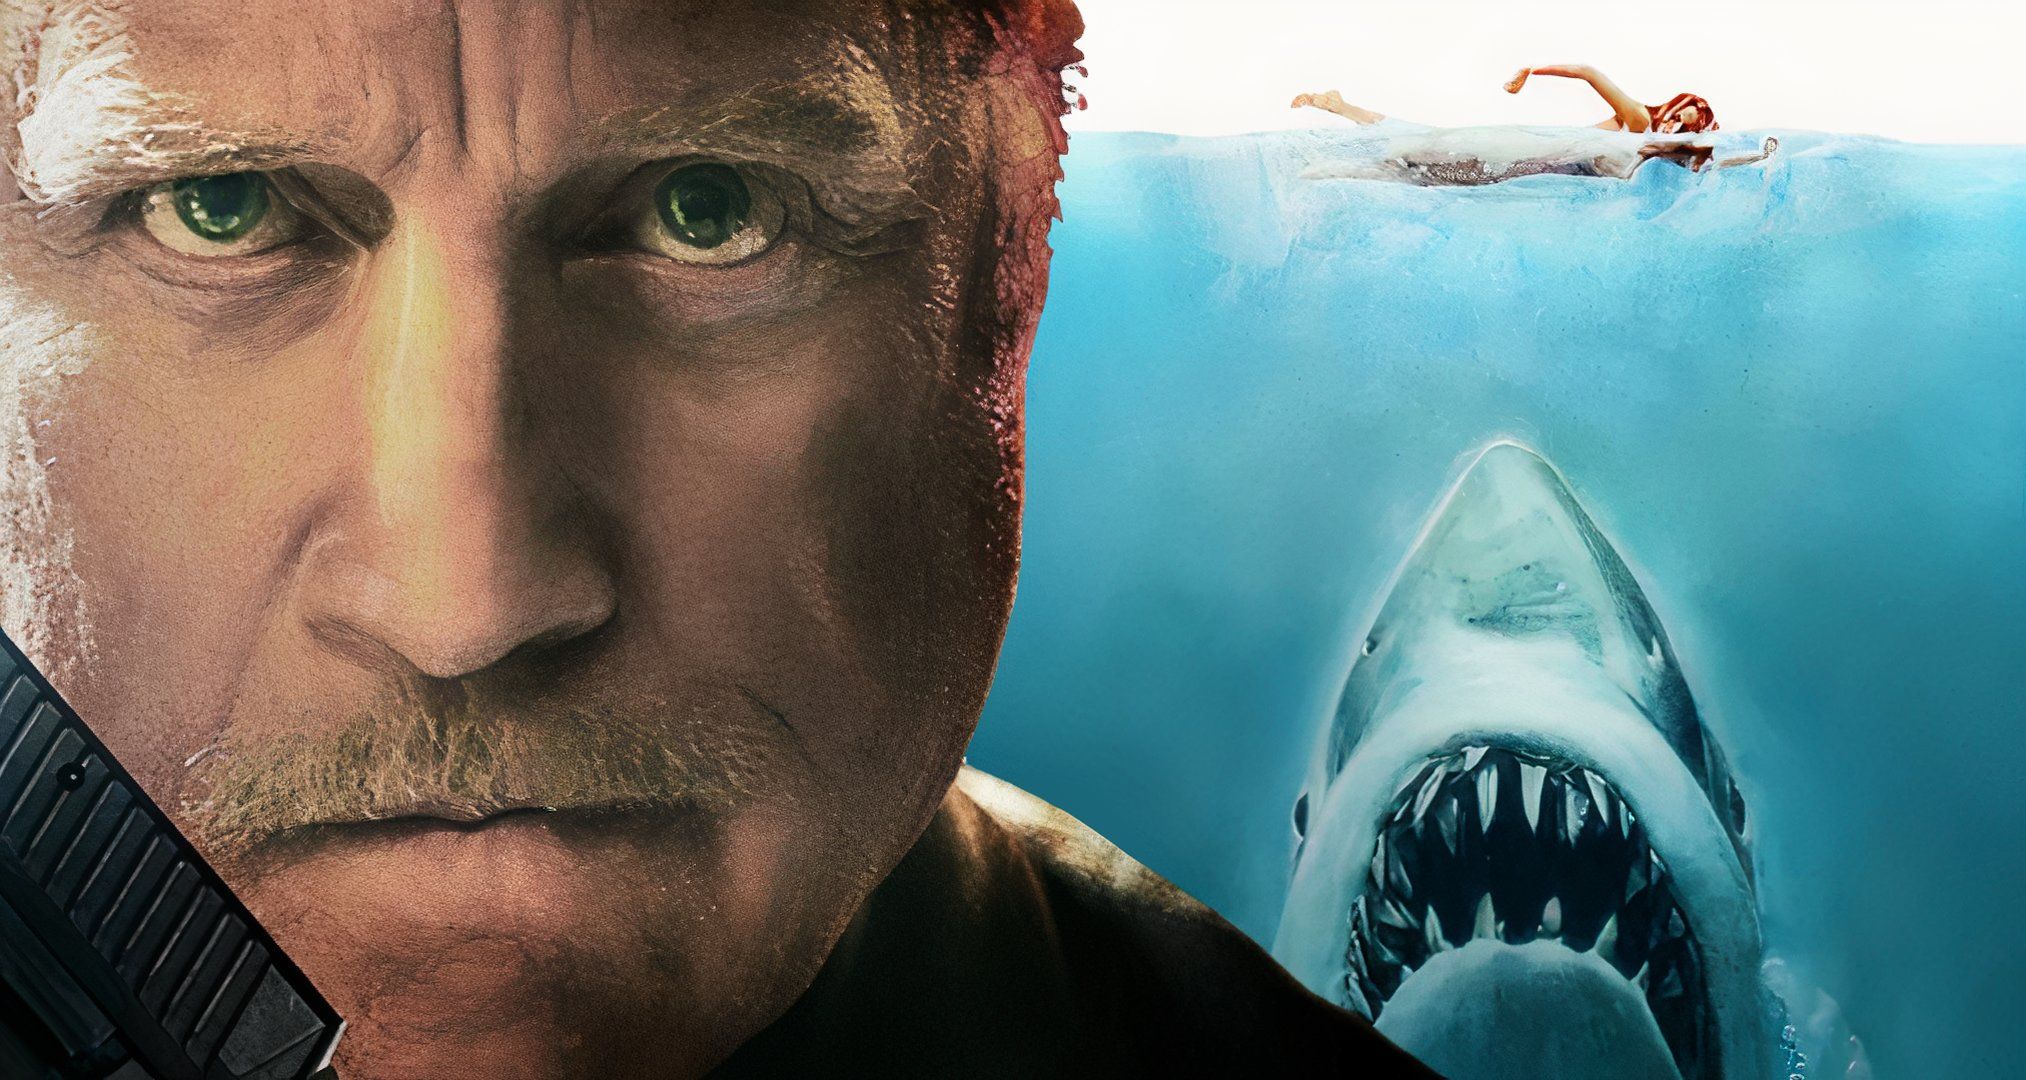 Richard Dreyfuss looking angry alongside the Jaws poster.